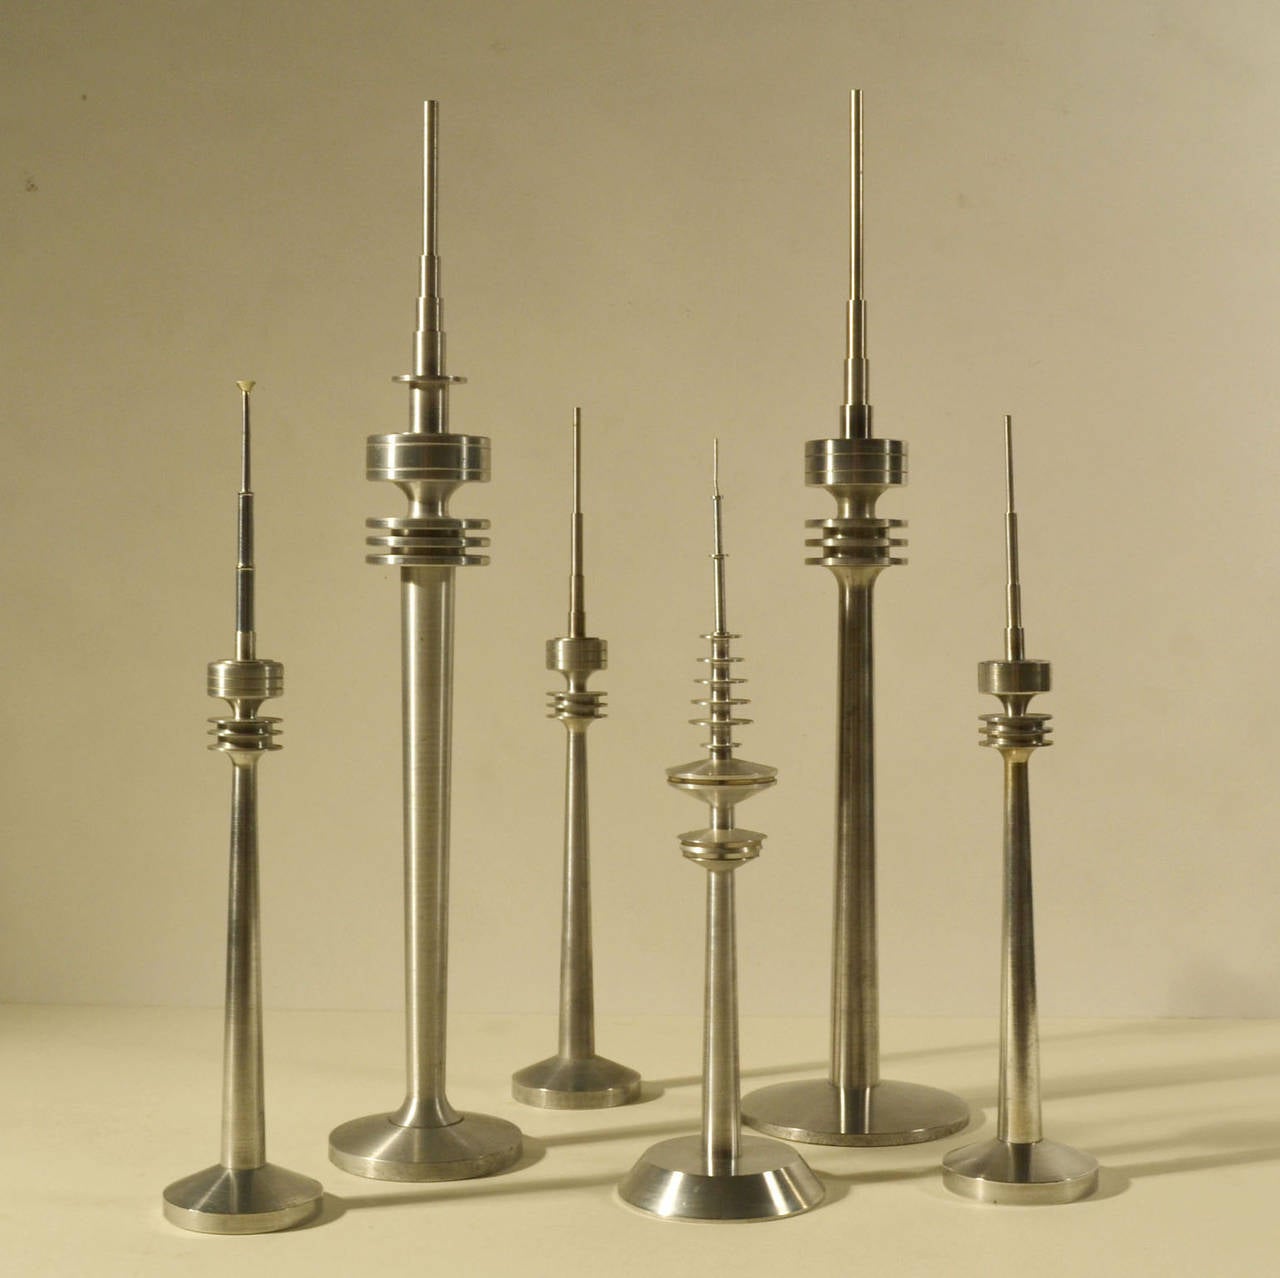 Scaled models of television tower models hand spun in aluminium.
Their heights vary from 45-30 cm.
The towers can be sold individually.